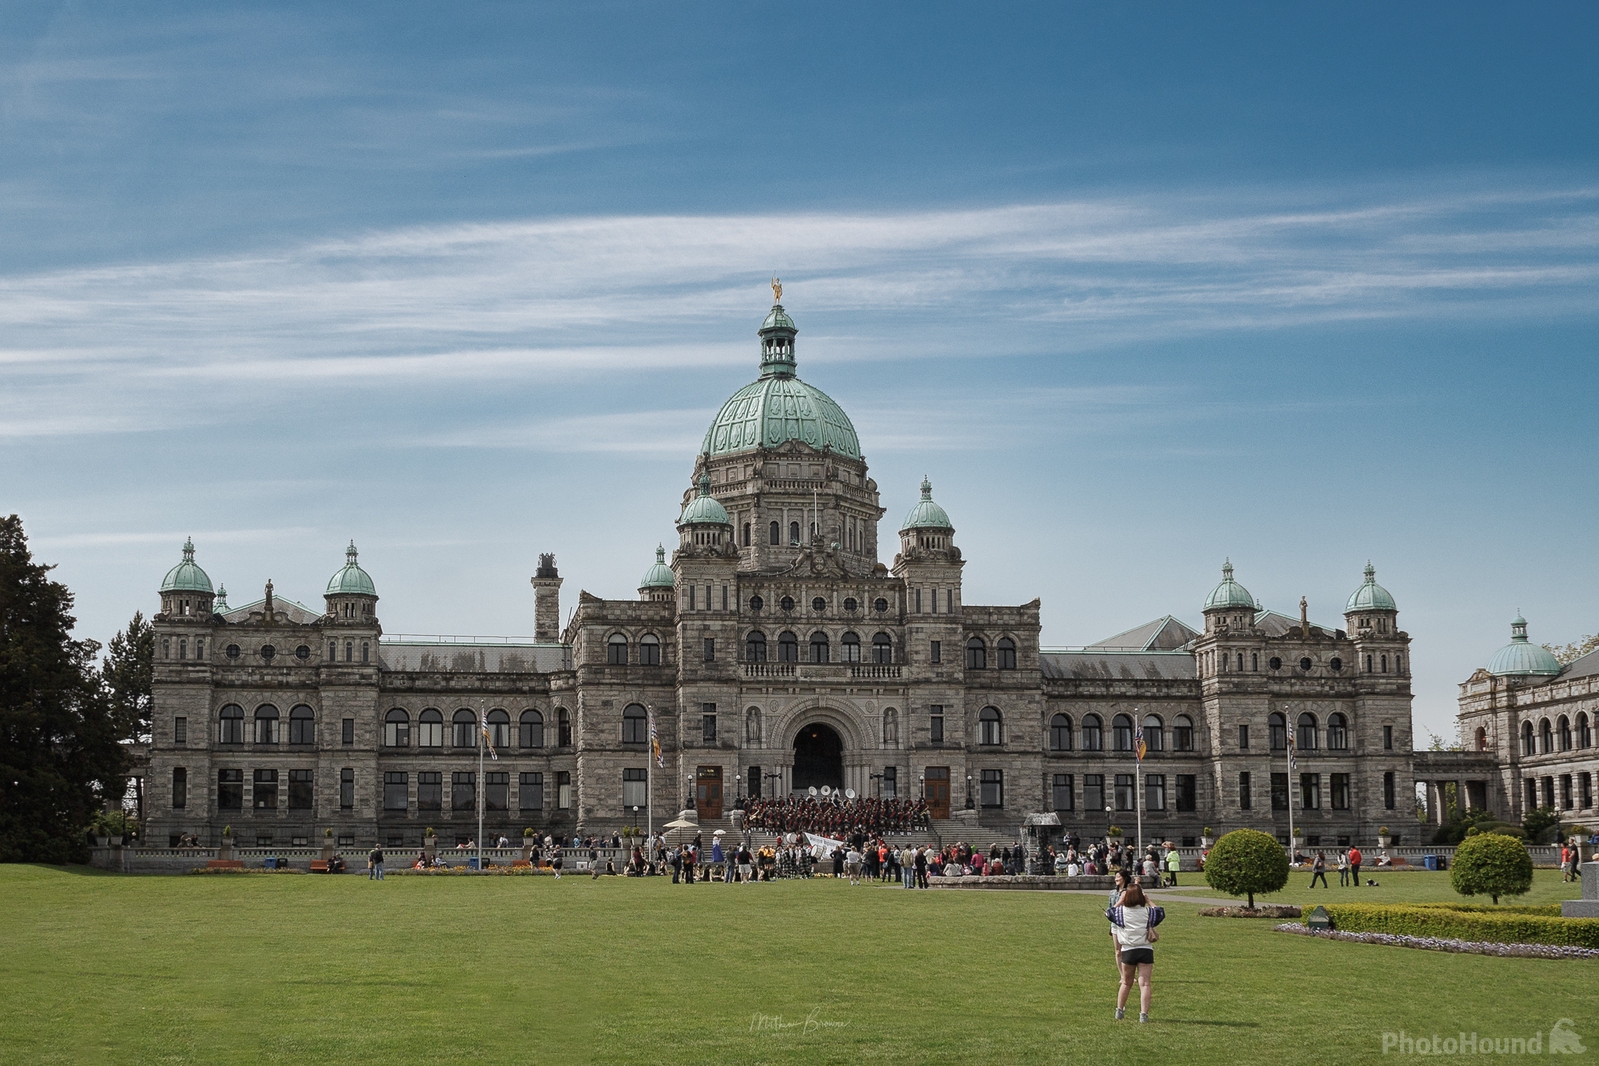 Image of British Columbia Parliament Buildings - Exterior by Mathew Browne